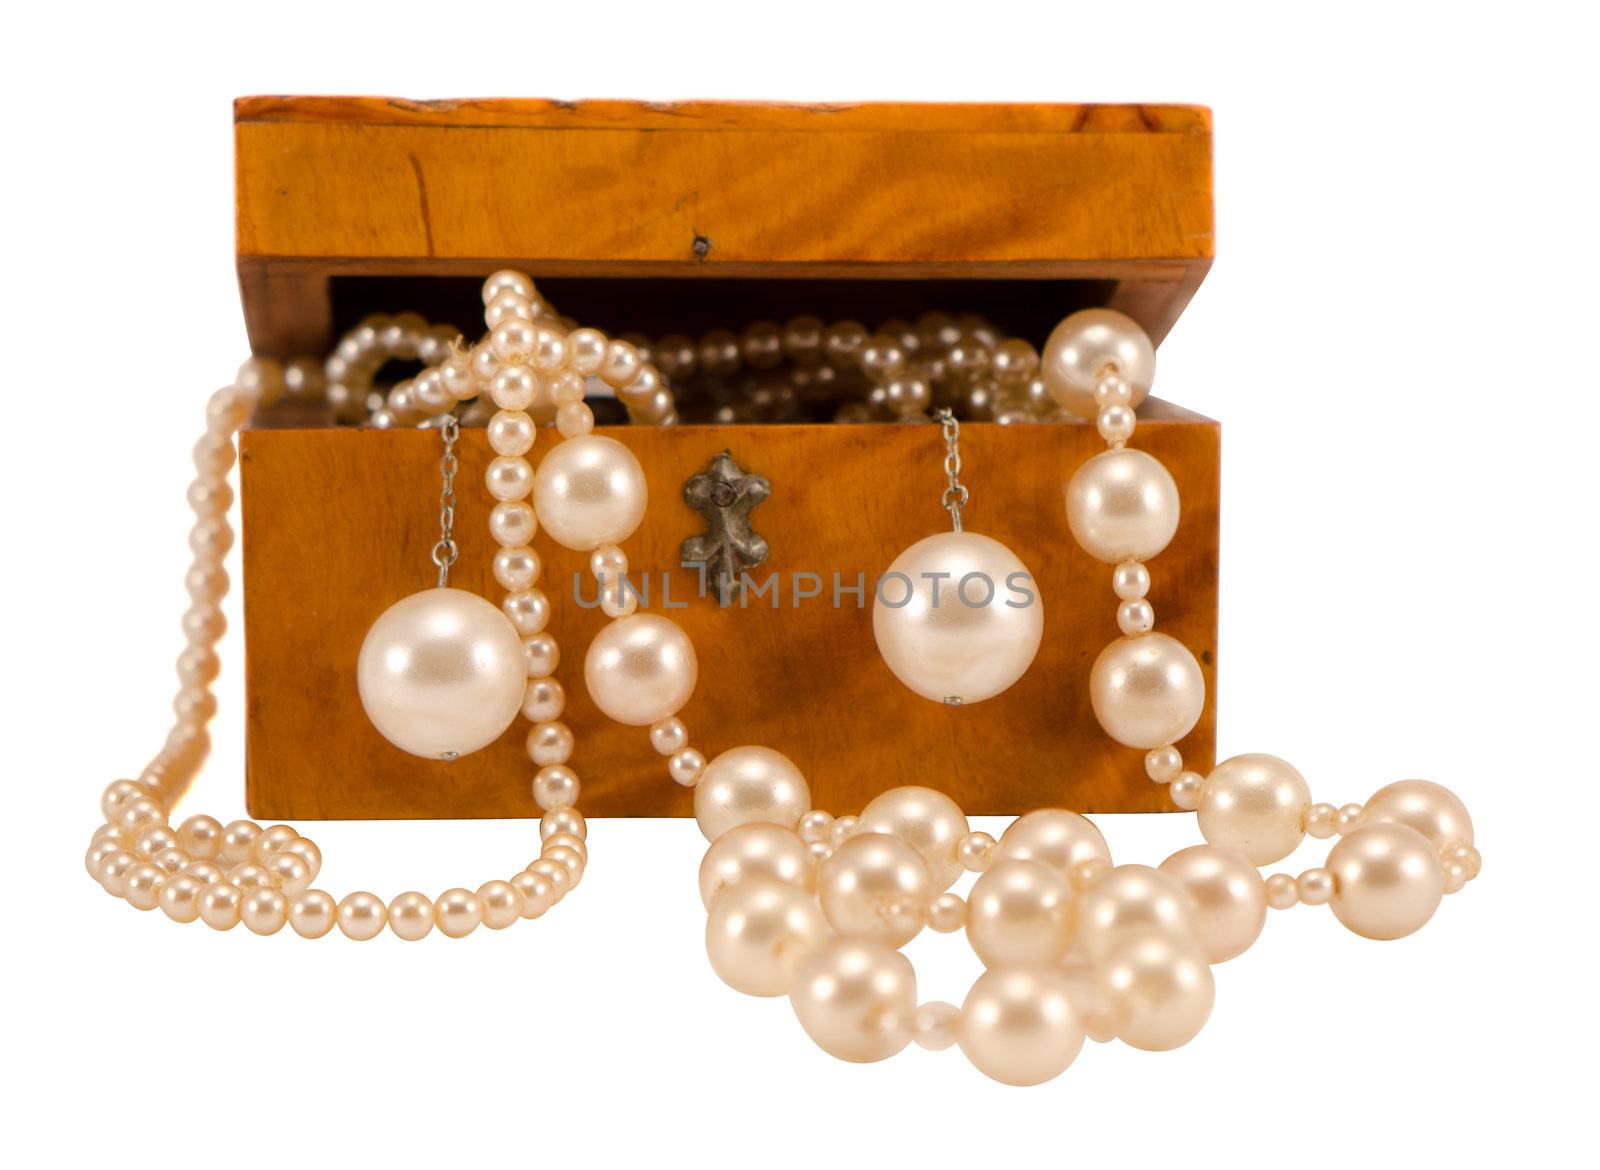 Pearl jewelry beads necklace earring in retro wooden box isolated on white